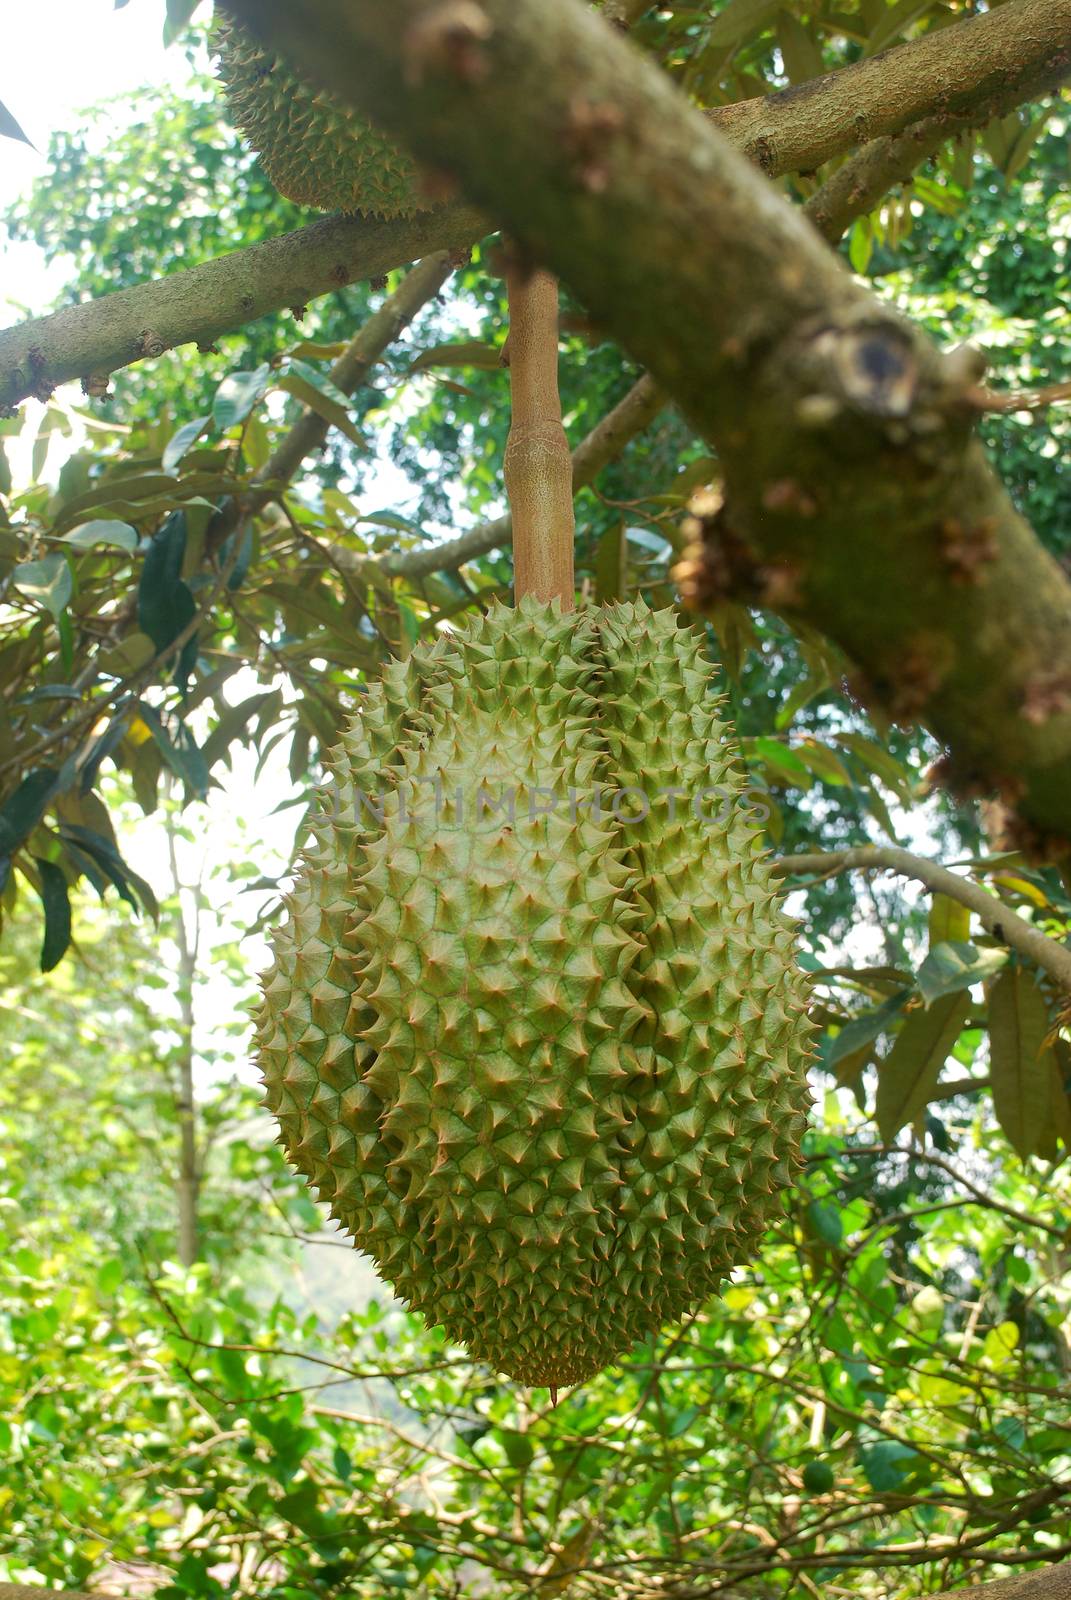 The cultivation of Mon Thong durian in tropical Thailand.